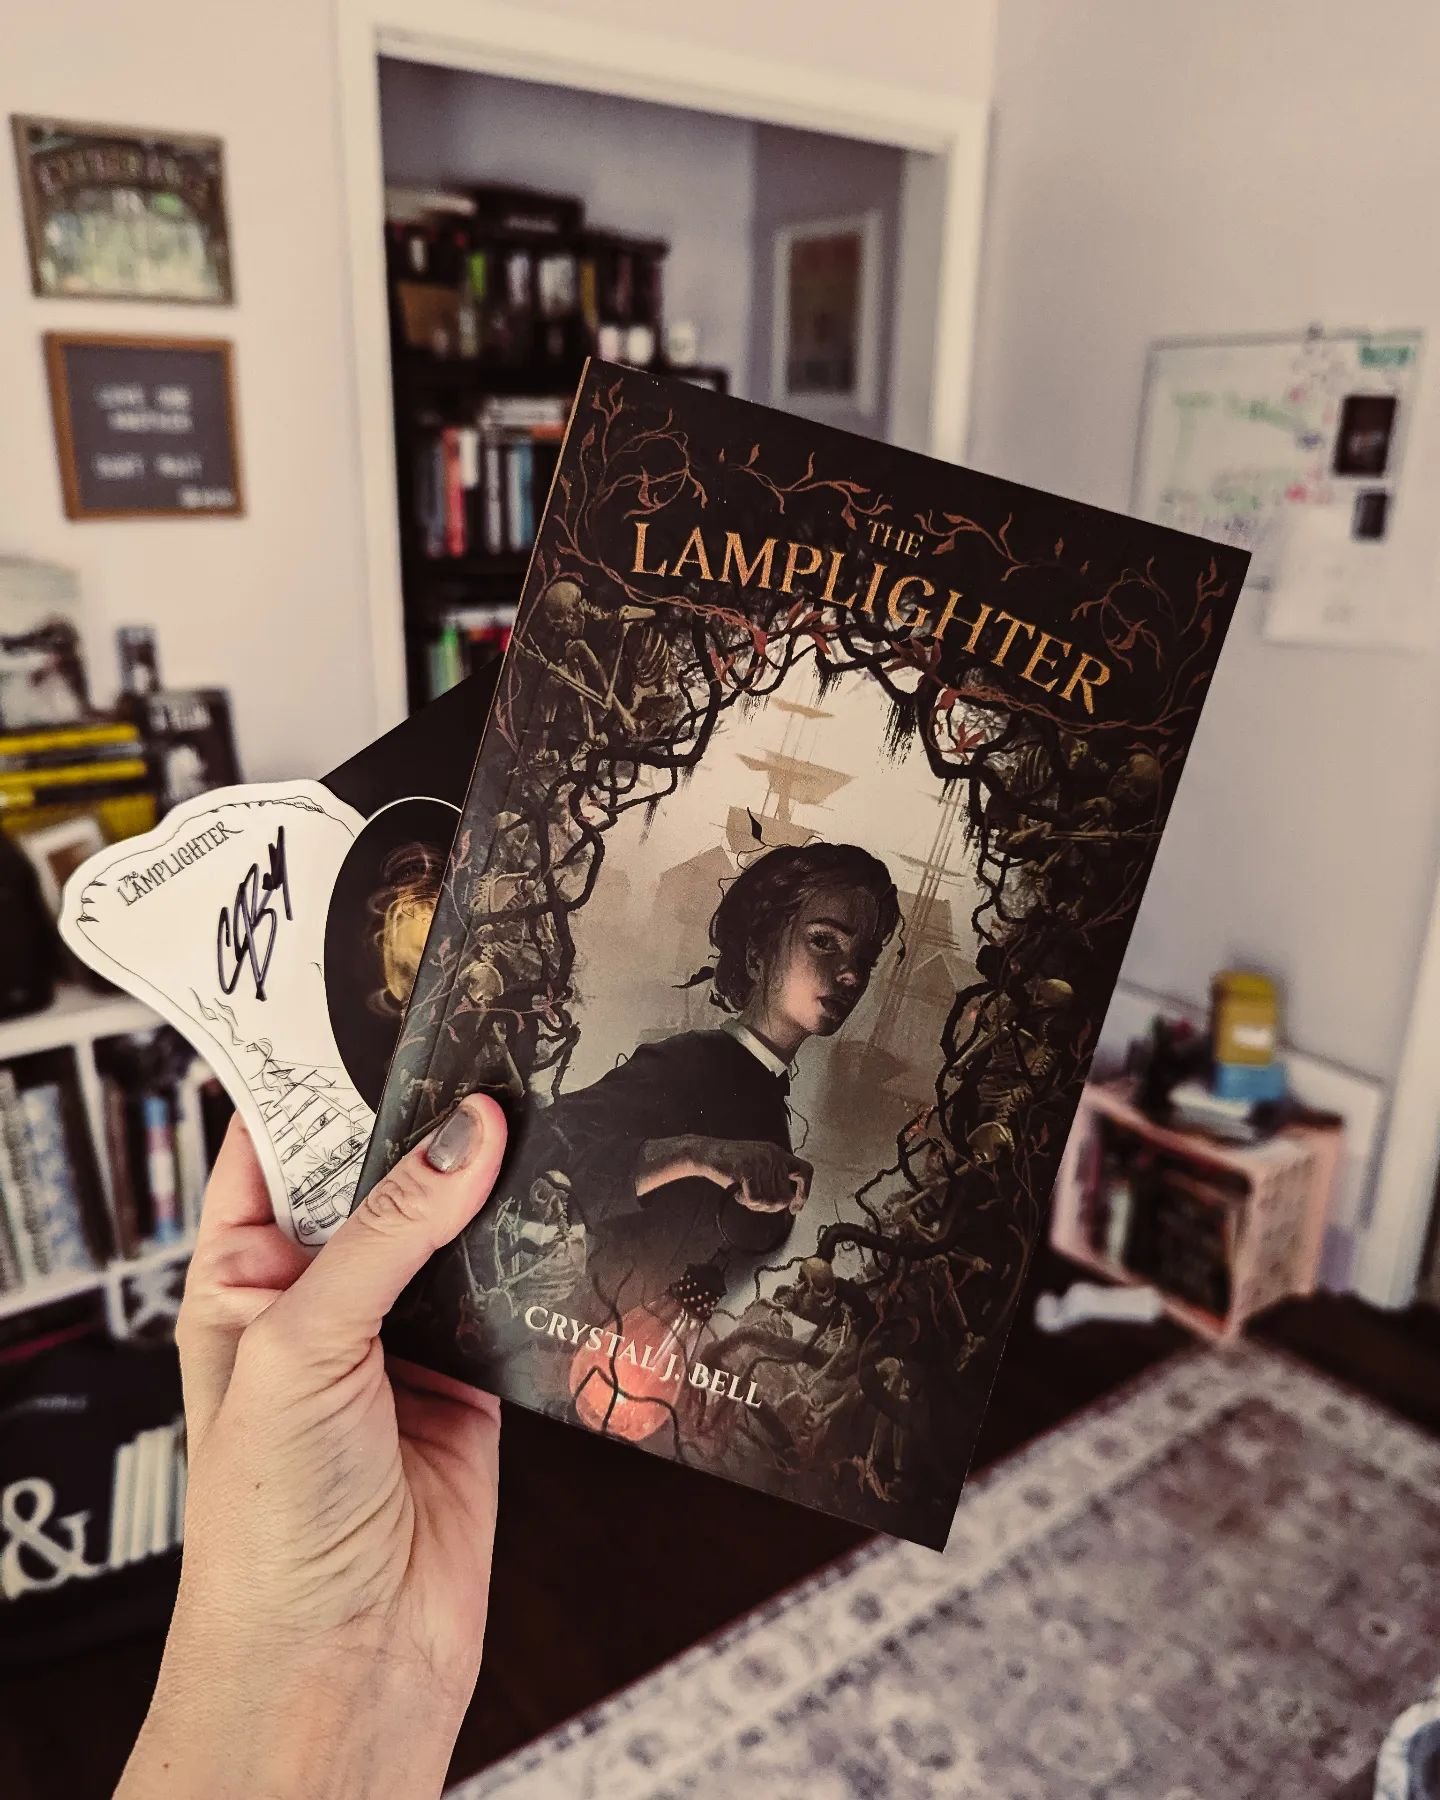 I had the honor of reading an early copy of THE LAMPLIGHTER by Crystal J. Bell late last year. It's a creepy, gothic YA horror/mystery set in New England in the 1800s and follows Temperance, the town's lamplighter. Her town has a wicked, deadly fog t